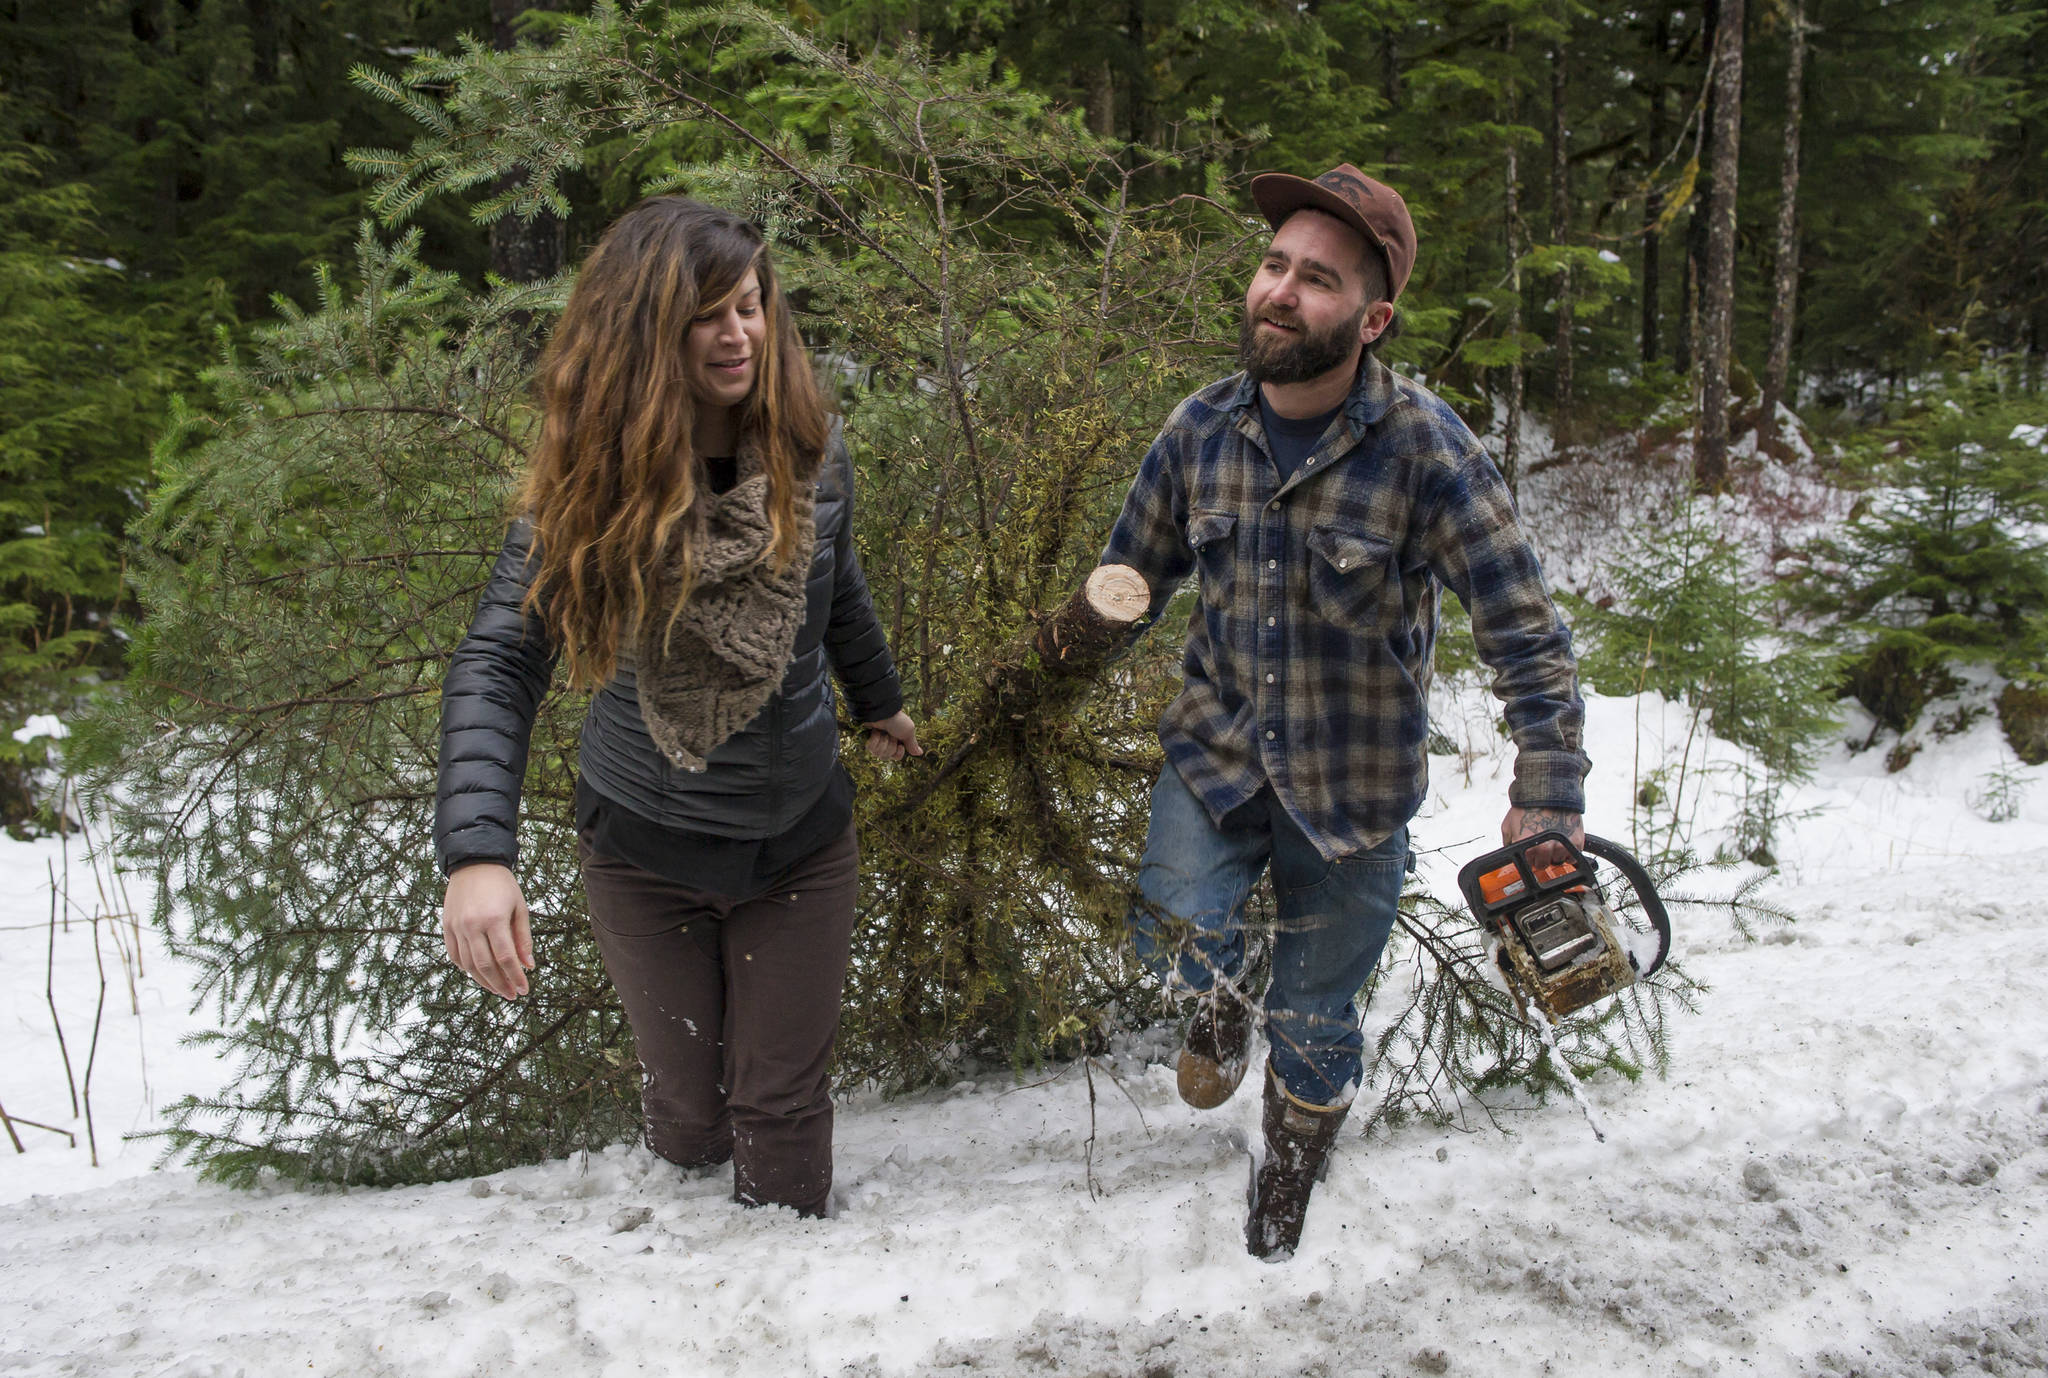 Matt Roda and his wife, Emily Smith, haulout their freshly cut spruce tree for Christmas from under the powerlines on Fish Creek Road on Wednesday, Nov. 29, 2017. (Michael Penn | Juneau Empire)